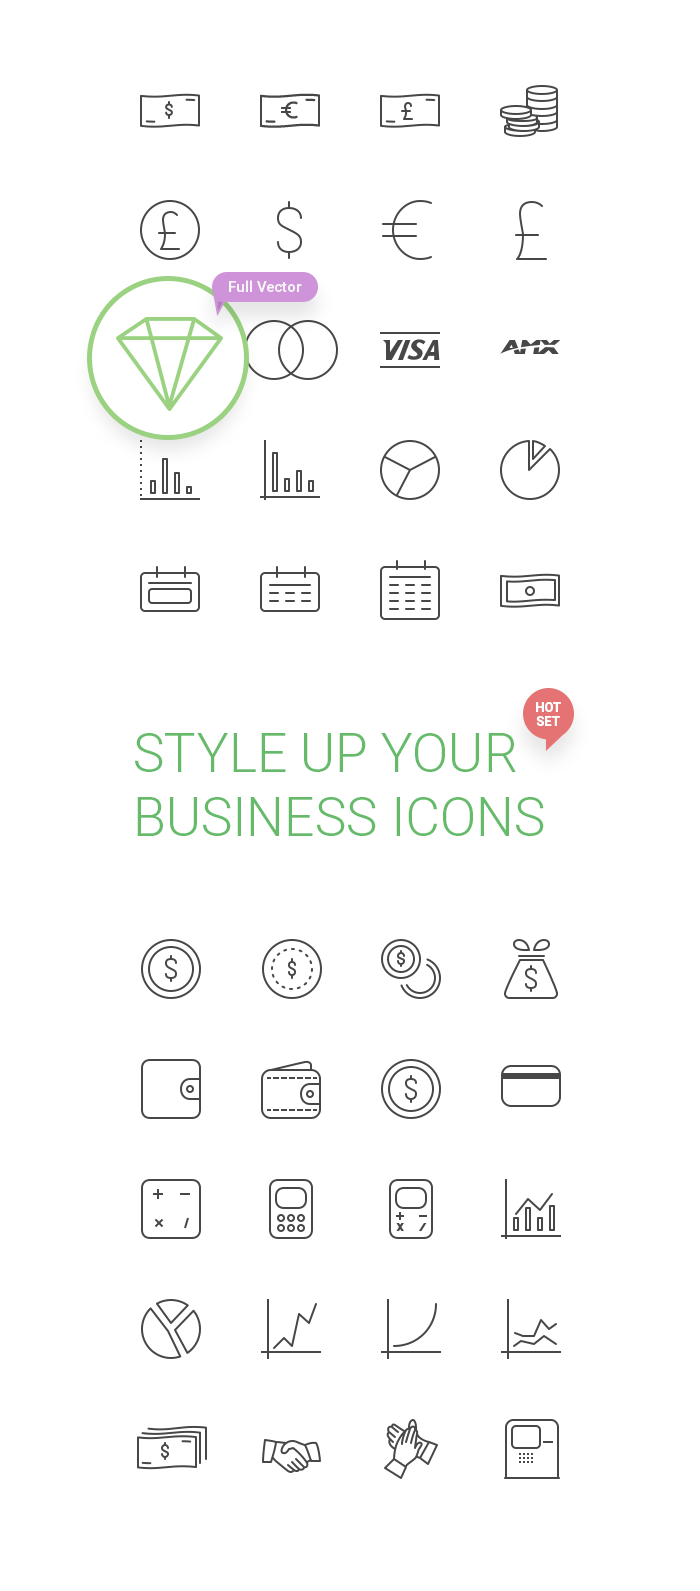 50 Free Business Icons by Creative Tail in 2015年3月的42套扁平化图标合集下载